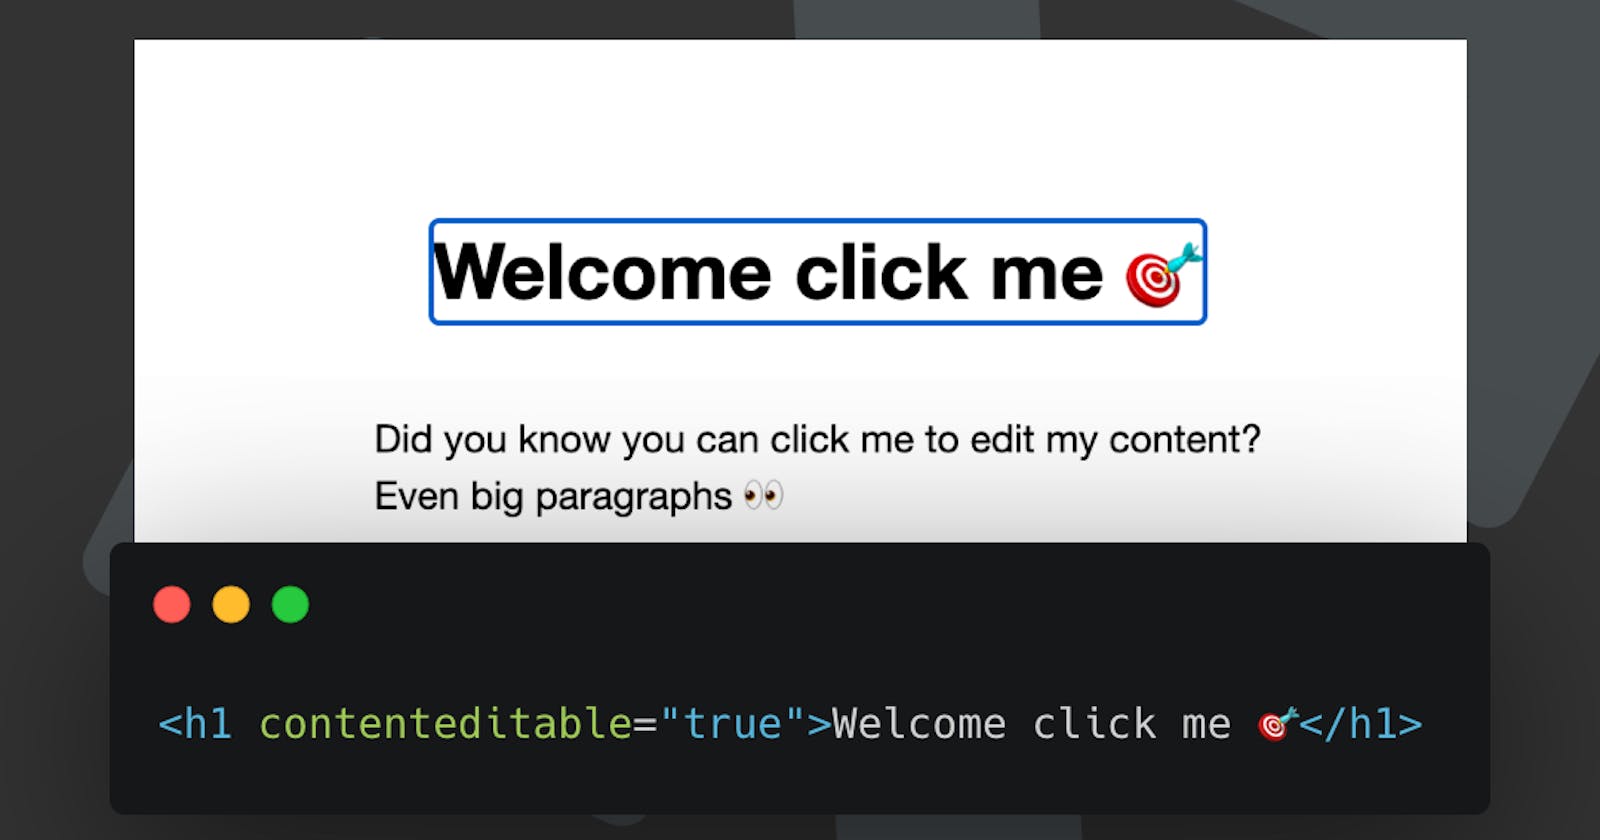 Did you know HTML elements can be editable?